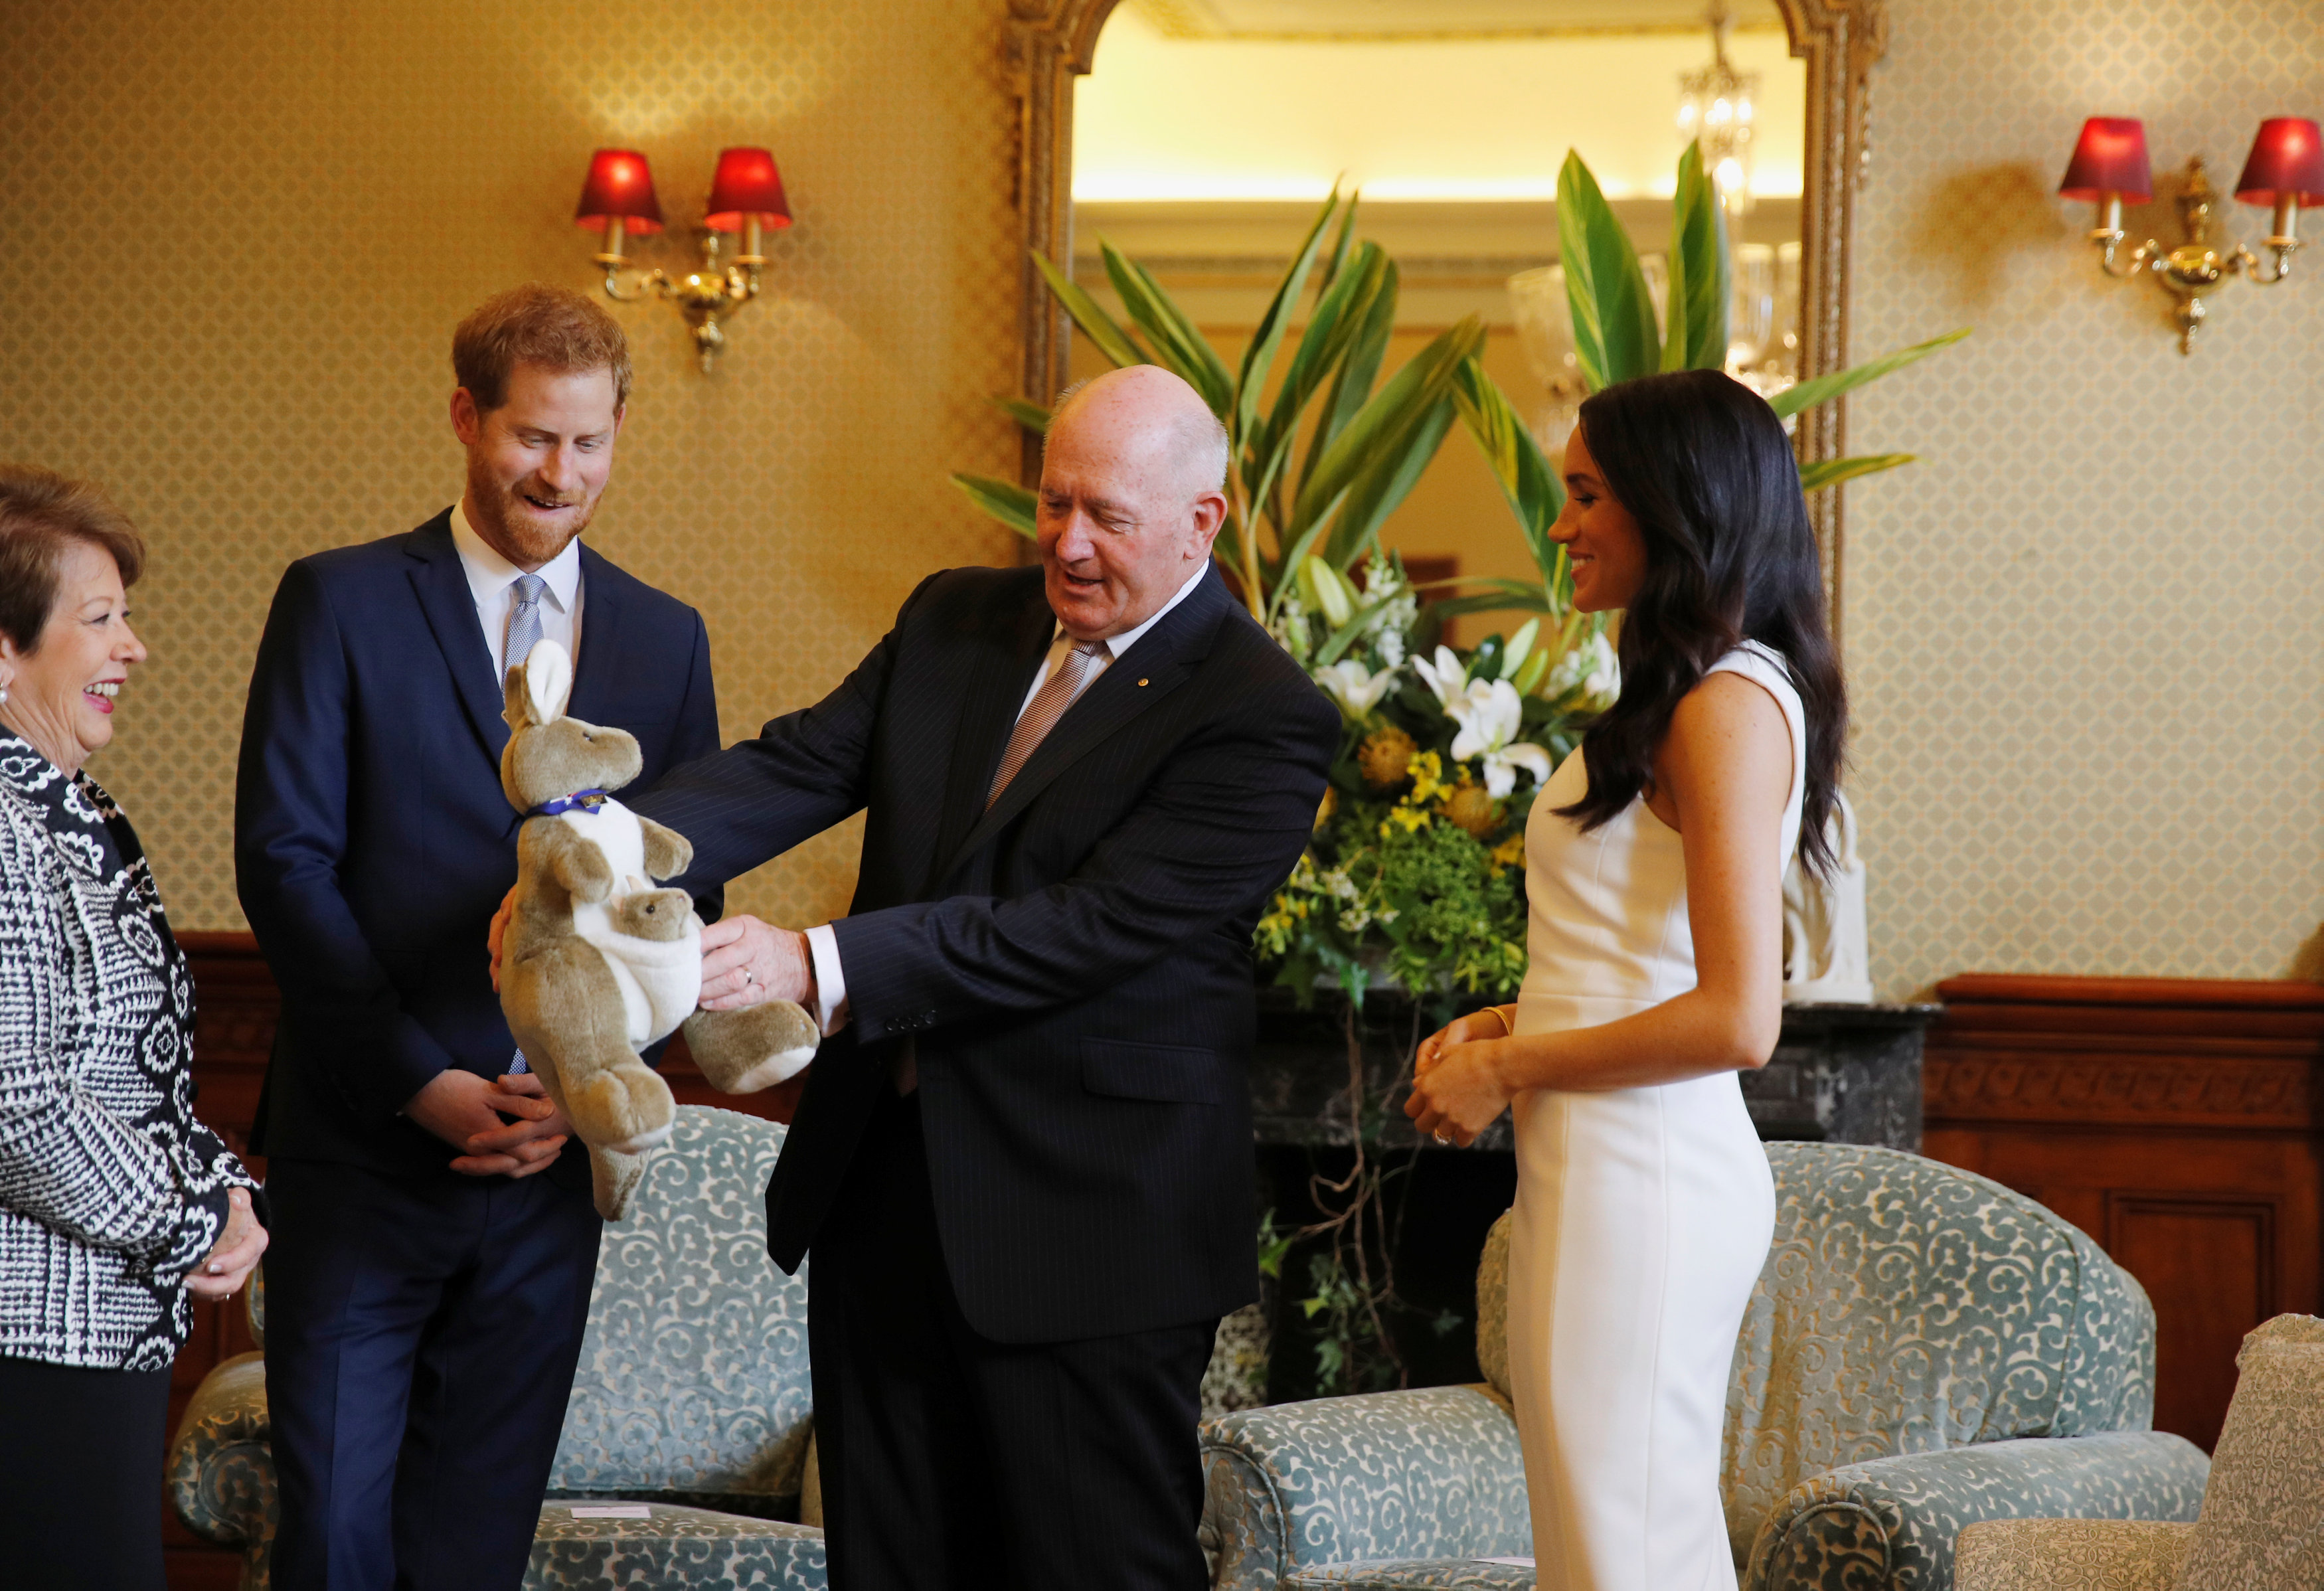 SYDNEY, AUSTRALIA - OCTOBER 16: Prince Harry, Duke of Sussex and Meghan, Duchess of Sussex look at a plush kangaroo with Australia's Governor General Peter Cosgrove and wife Lynne Cosgrove at Admiralty Housebush hats with Australia's Governor General Peter Cosgrove and his wife Lynne Cosgrove at Admiralty House on October 16, 2018 in Sydney, Australia. The Duke and Duchess of Sussex are on their official 16-day Autumn tour visiting cities in Australia, Fiji, Tonga and New Zealand. (Photo by Phil Noble - Pool/Getty Images)